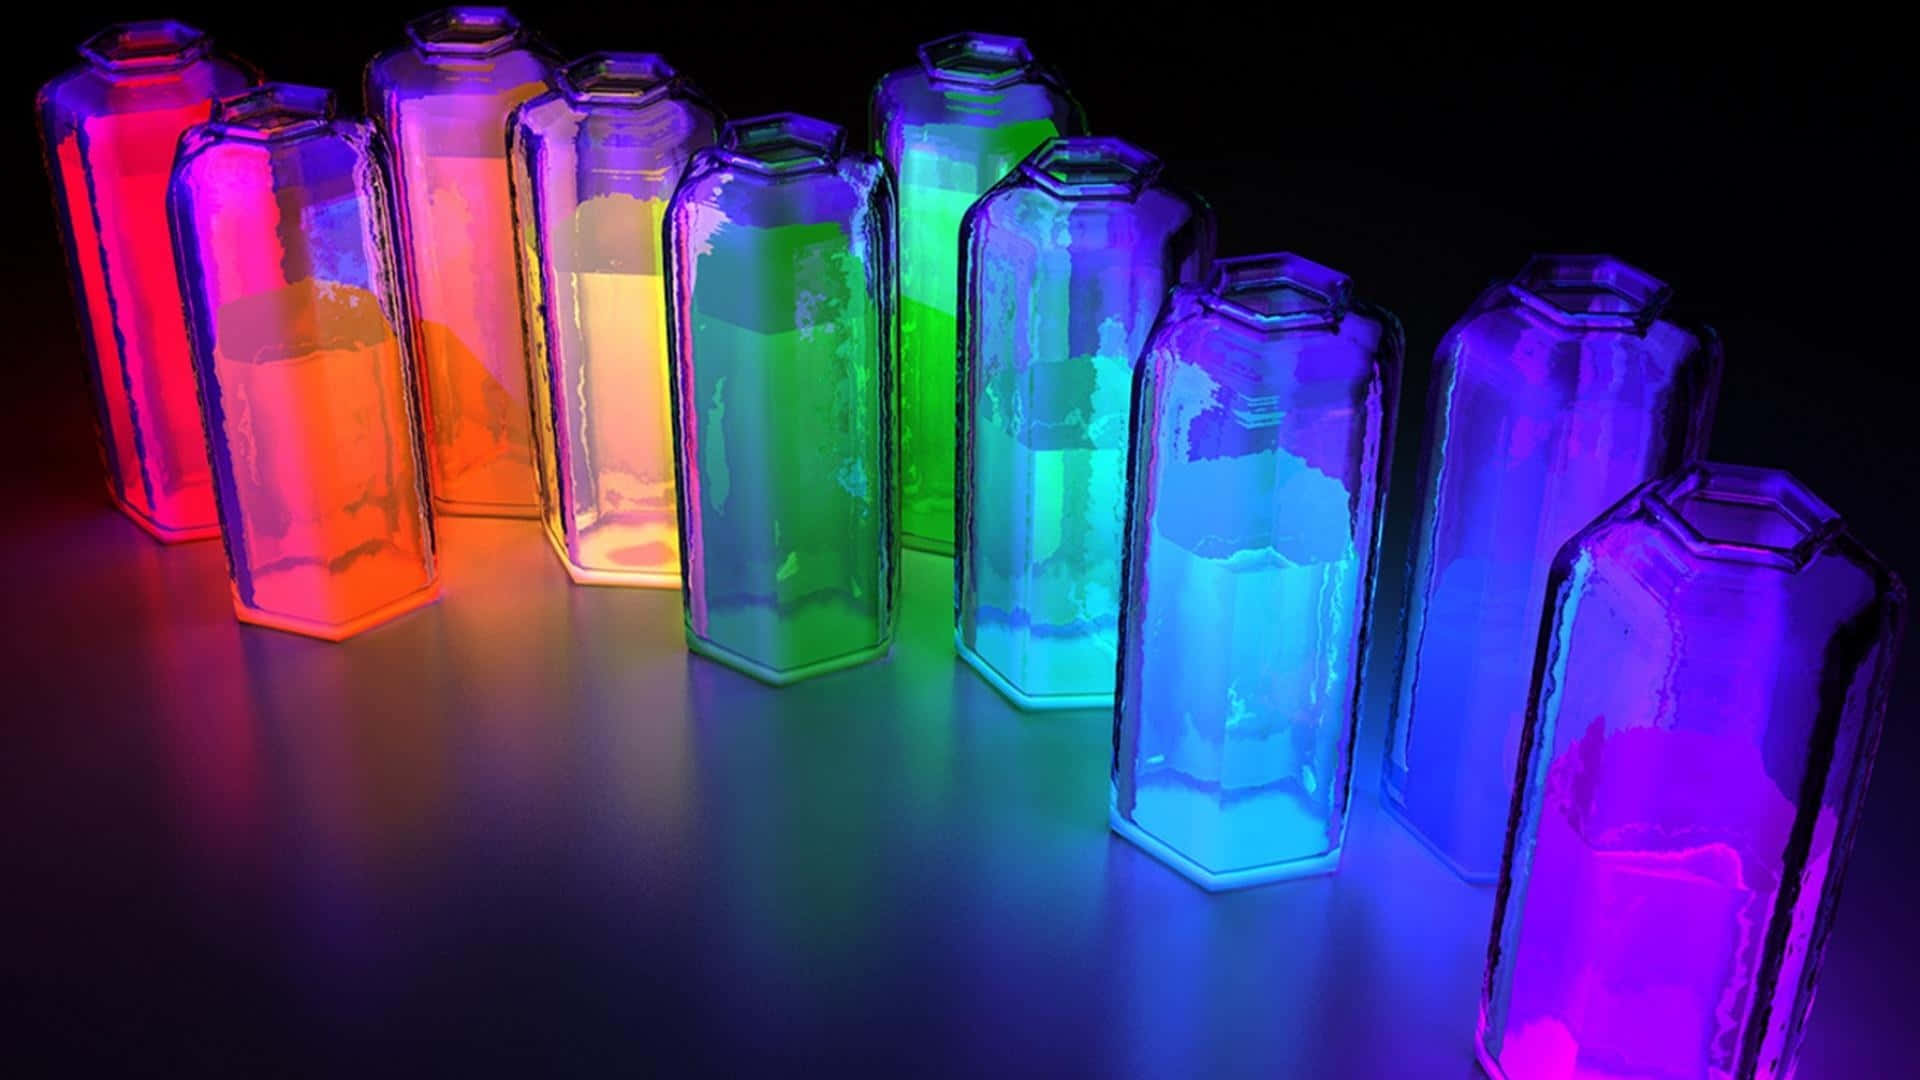 A Group Of Colorful Bottles With Lights In Them